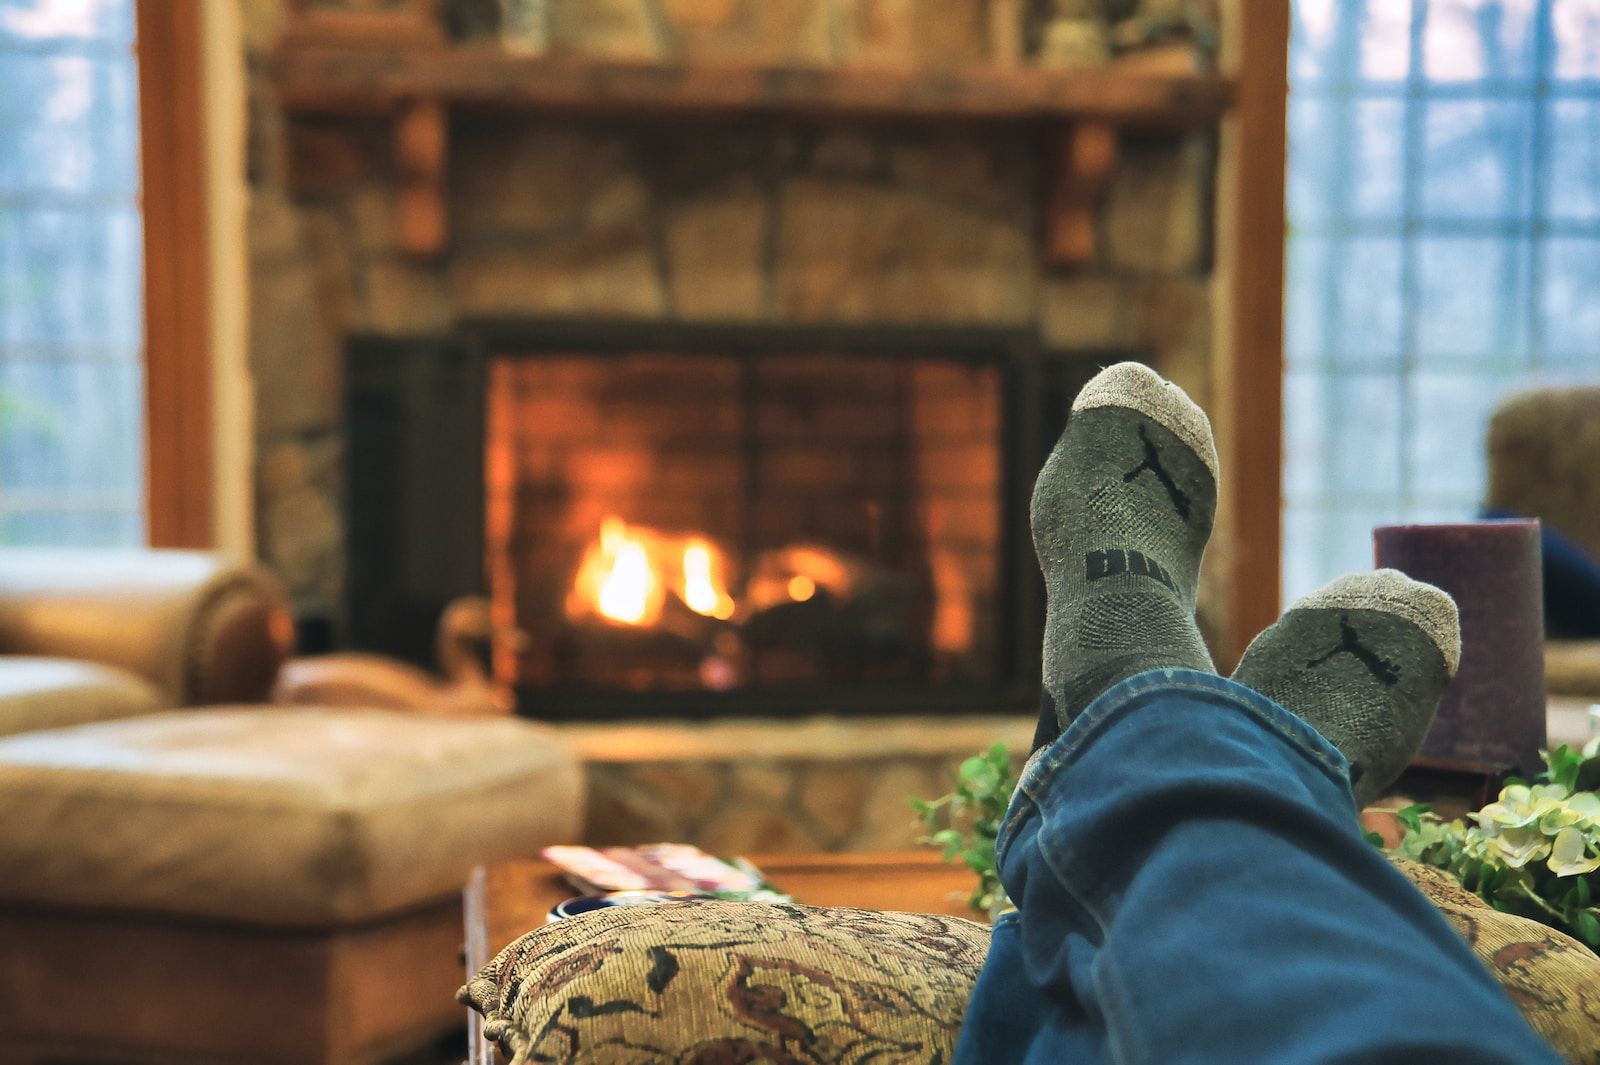 Relaxing by the fireplace with a business continuity plan in place